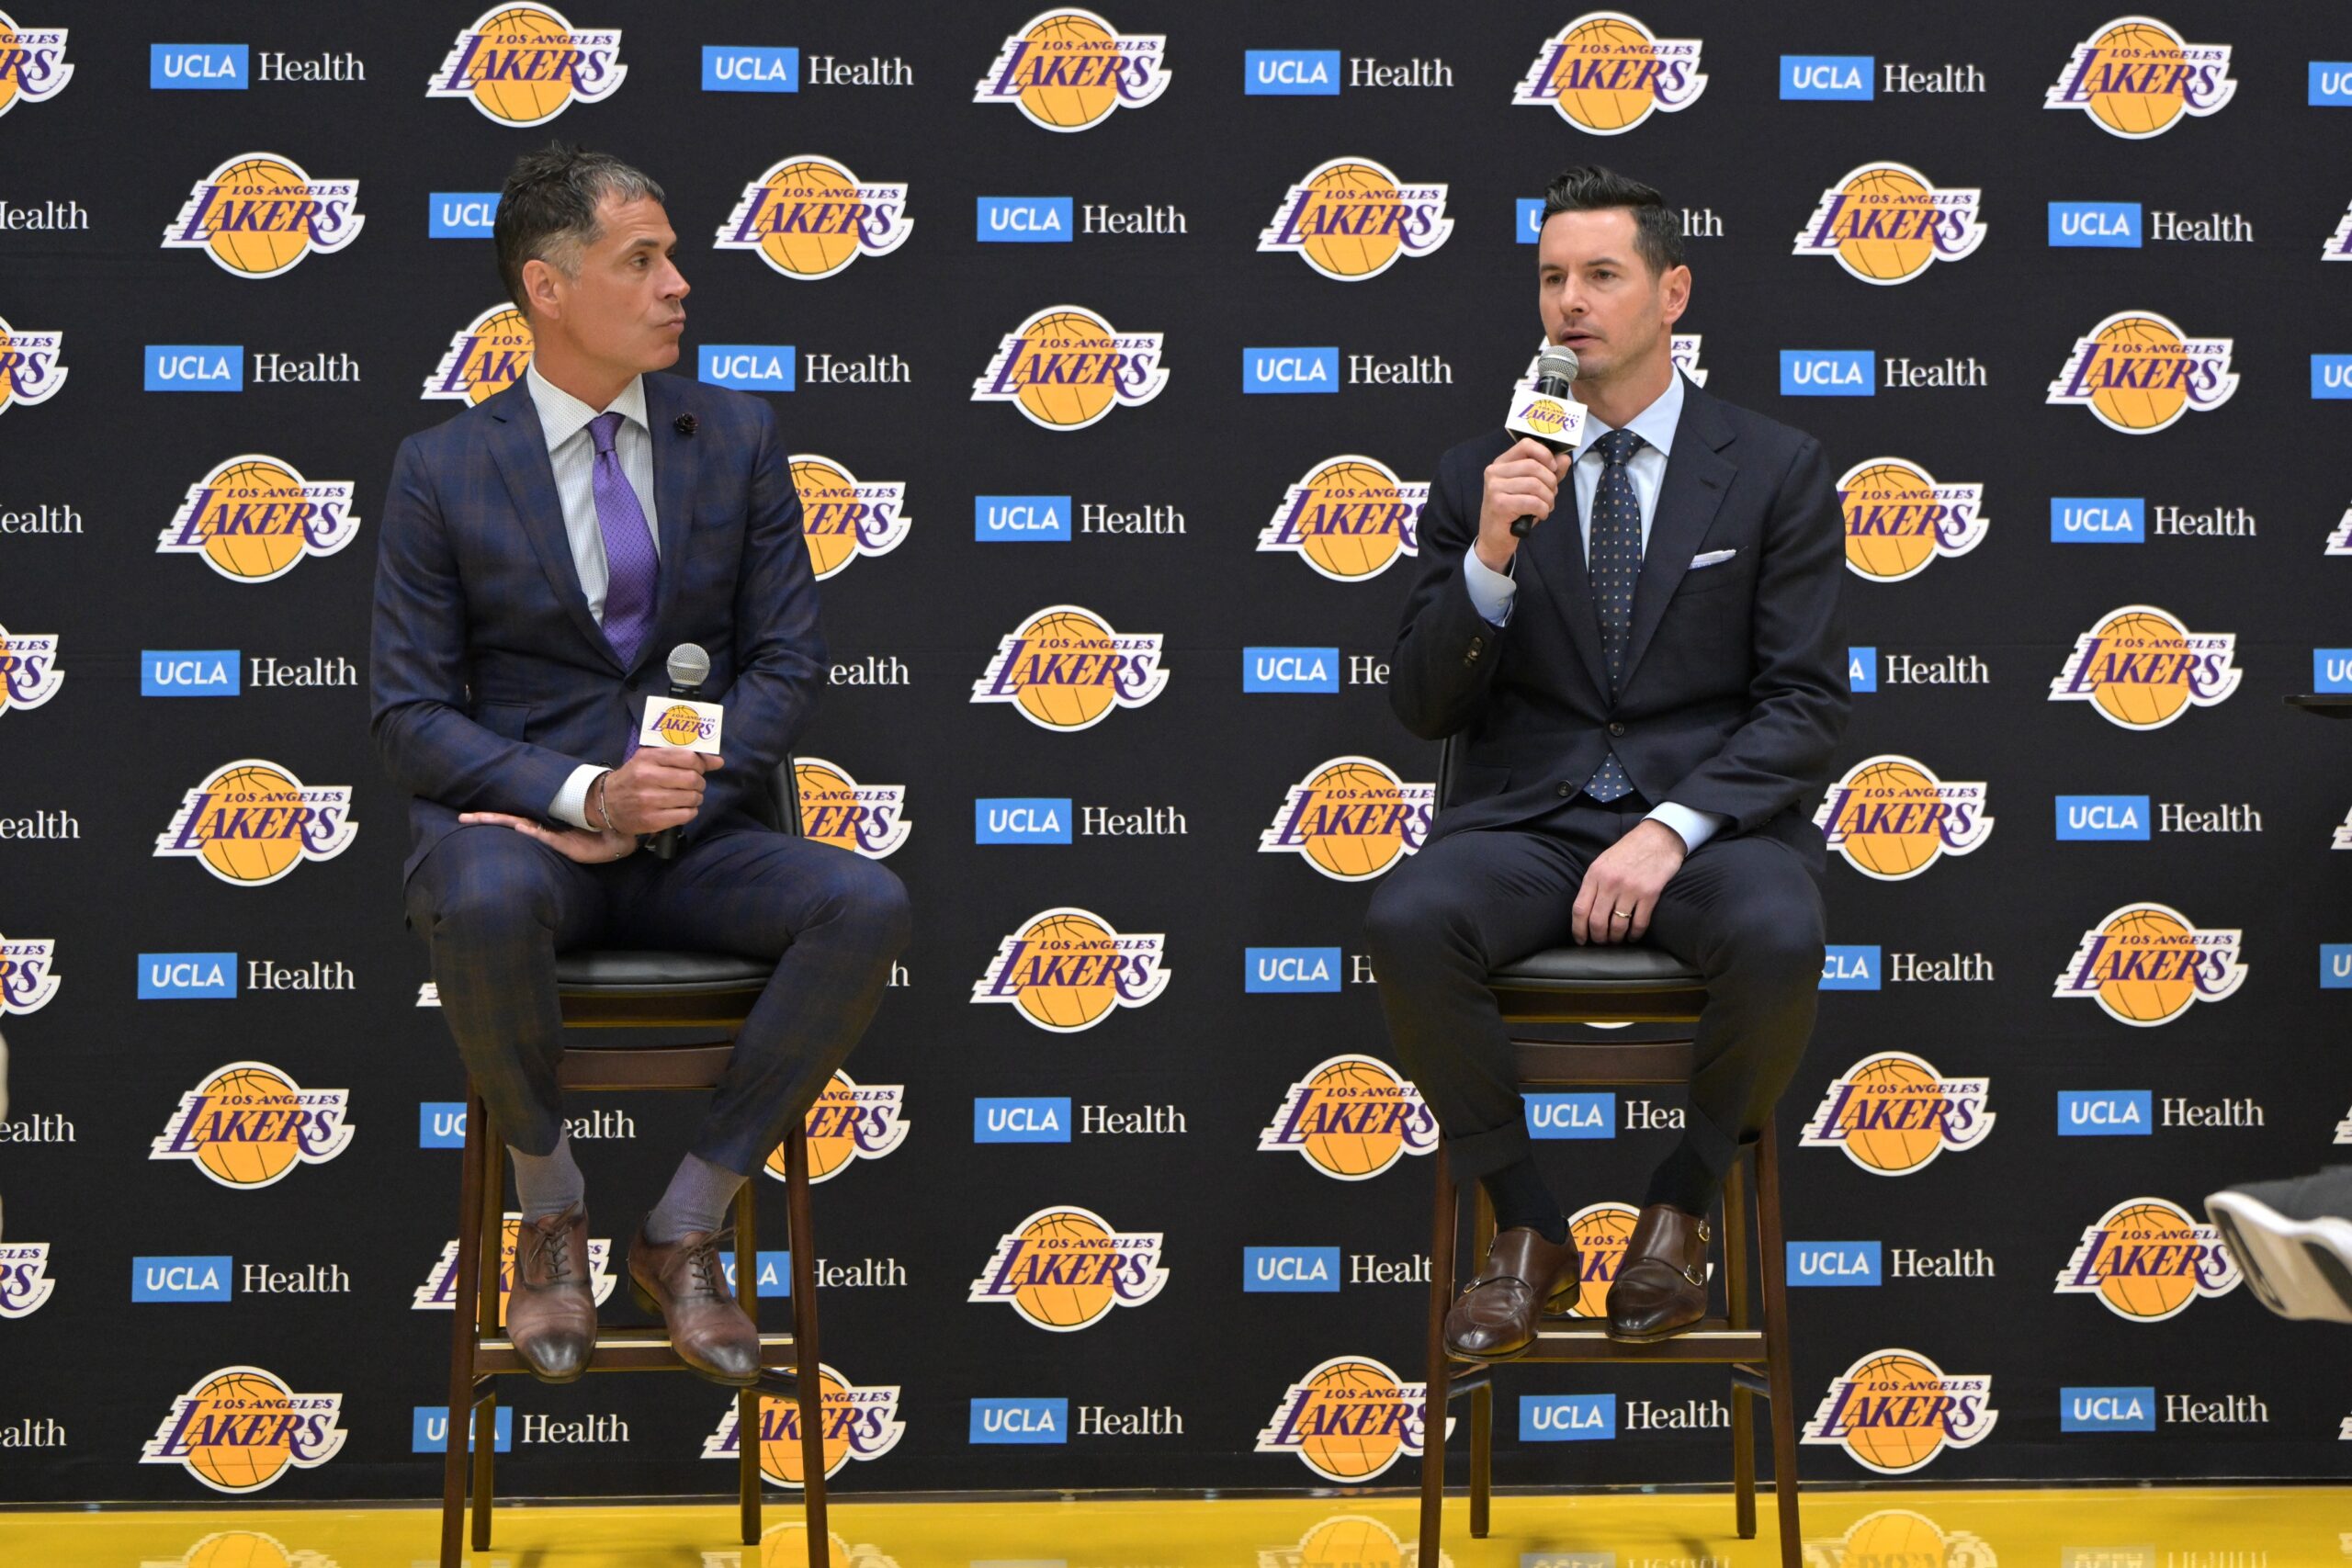 Los Angeles Lakers general manager Rob Pelinka loosk on as head coach JJ Redick speaks to the media during an introductory news conference at the UCLA Health Training Center.